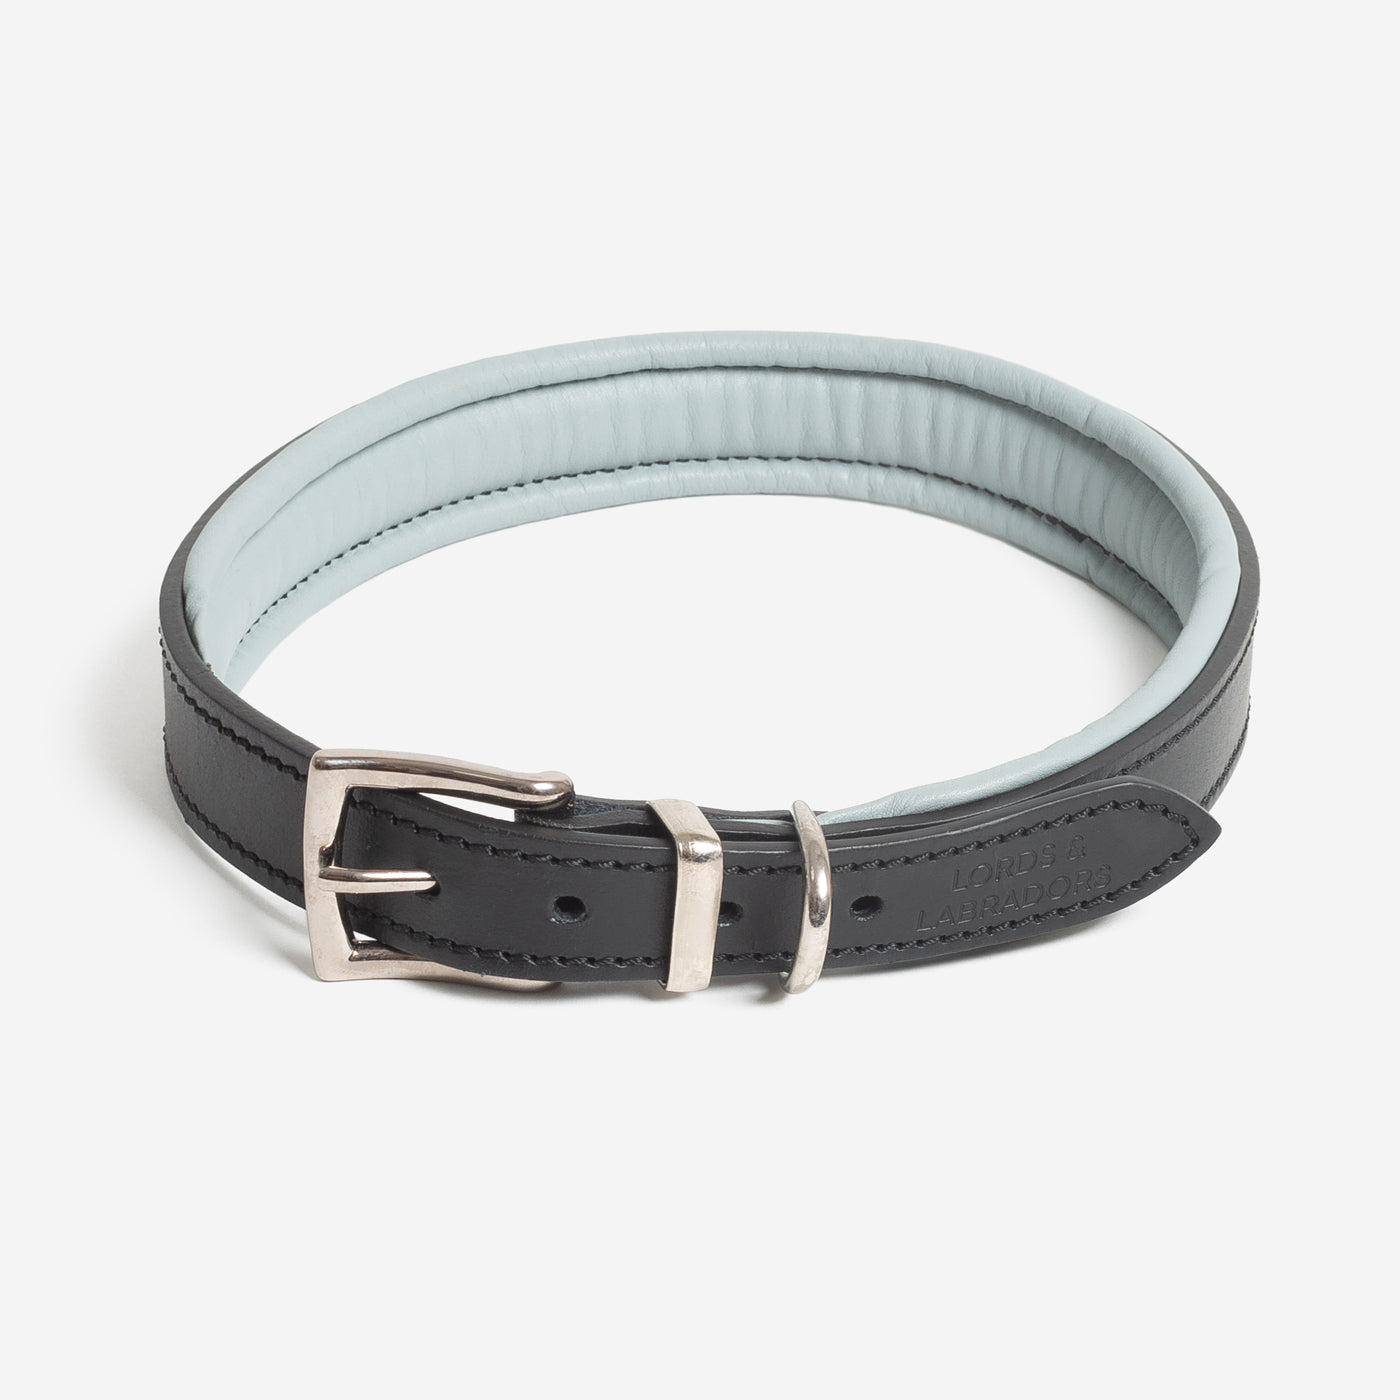 Discover dog walking luxury with our handcrafted Italian padded leather dog collar in Black & Grey! The perfect collar for dogs available now at Lords & Labradors 